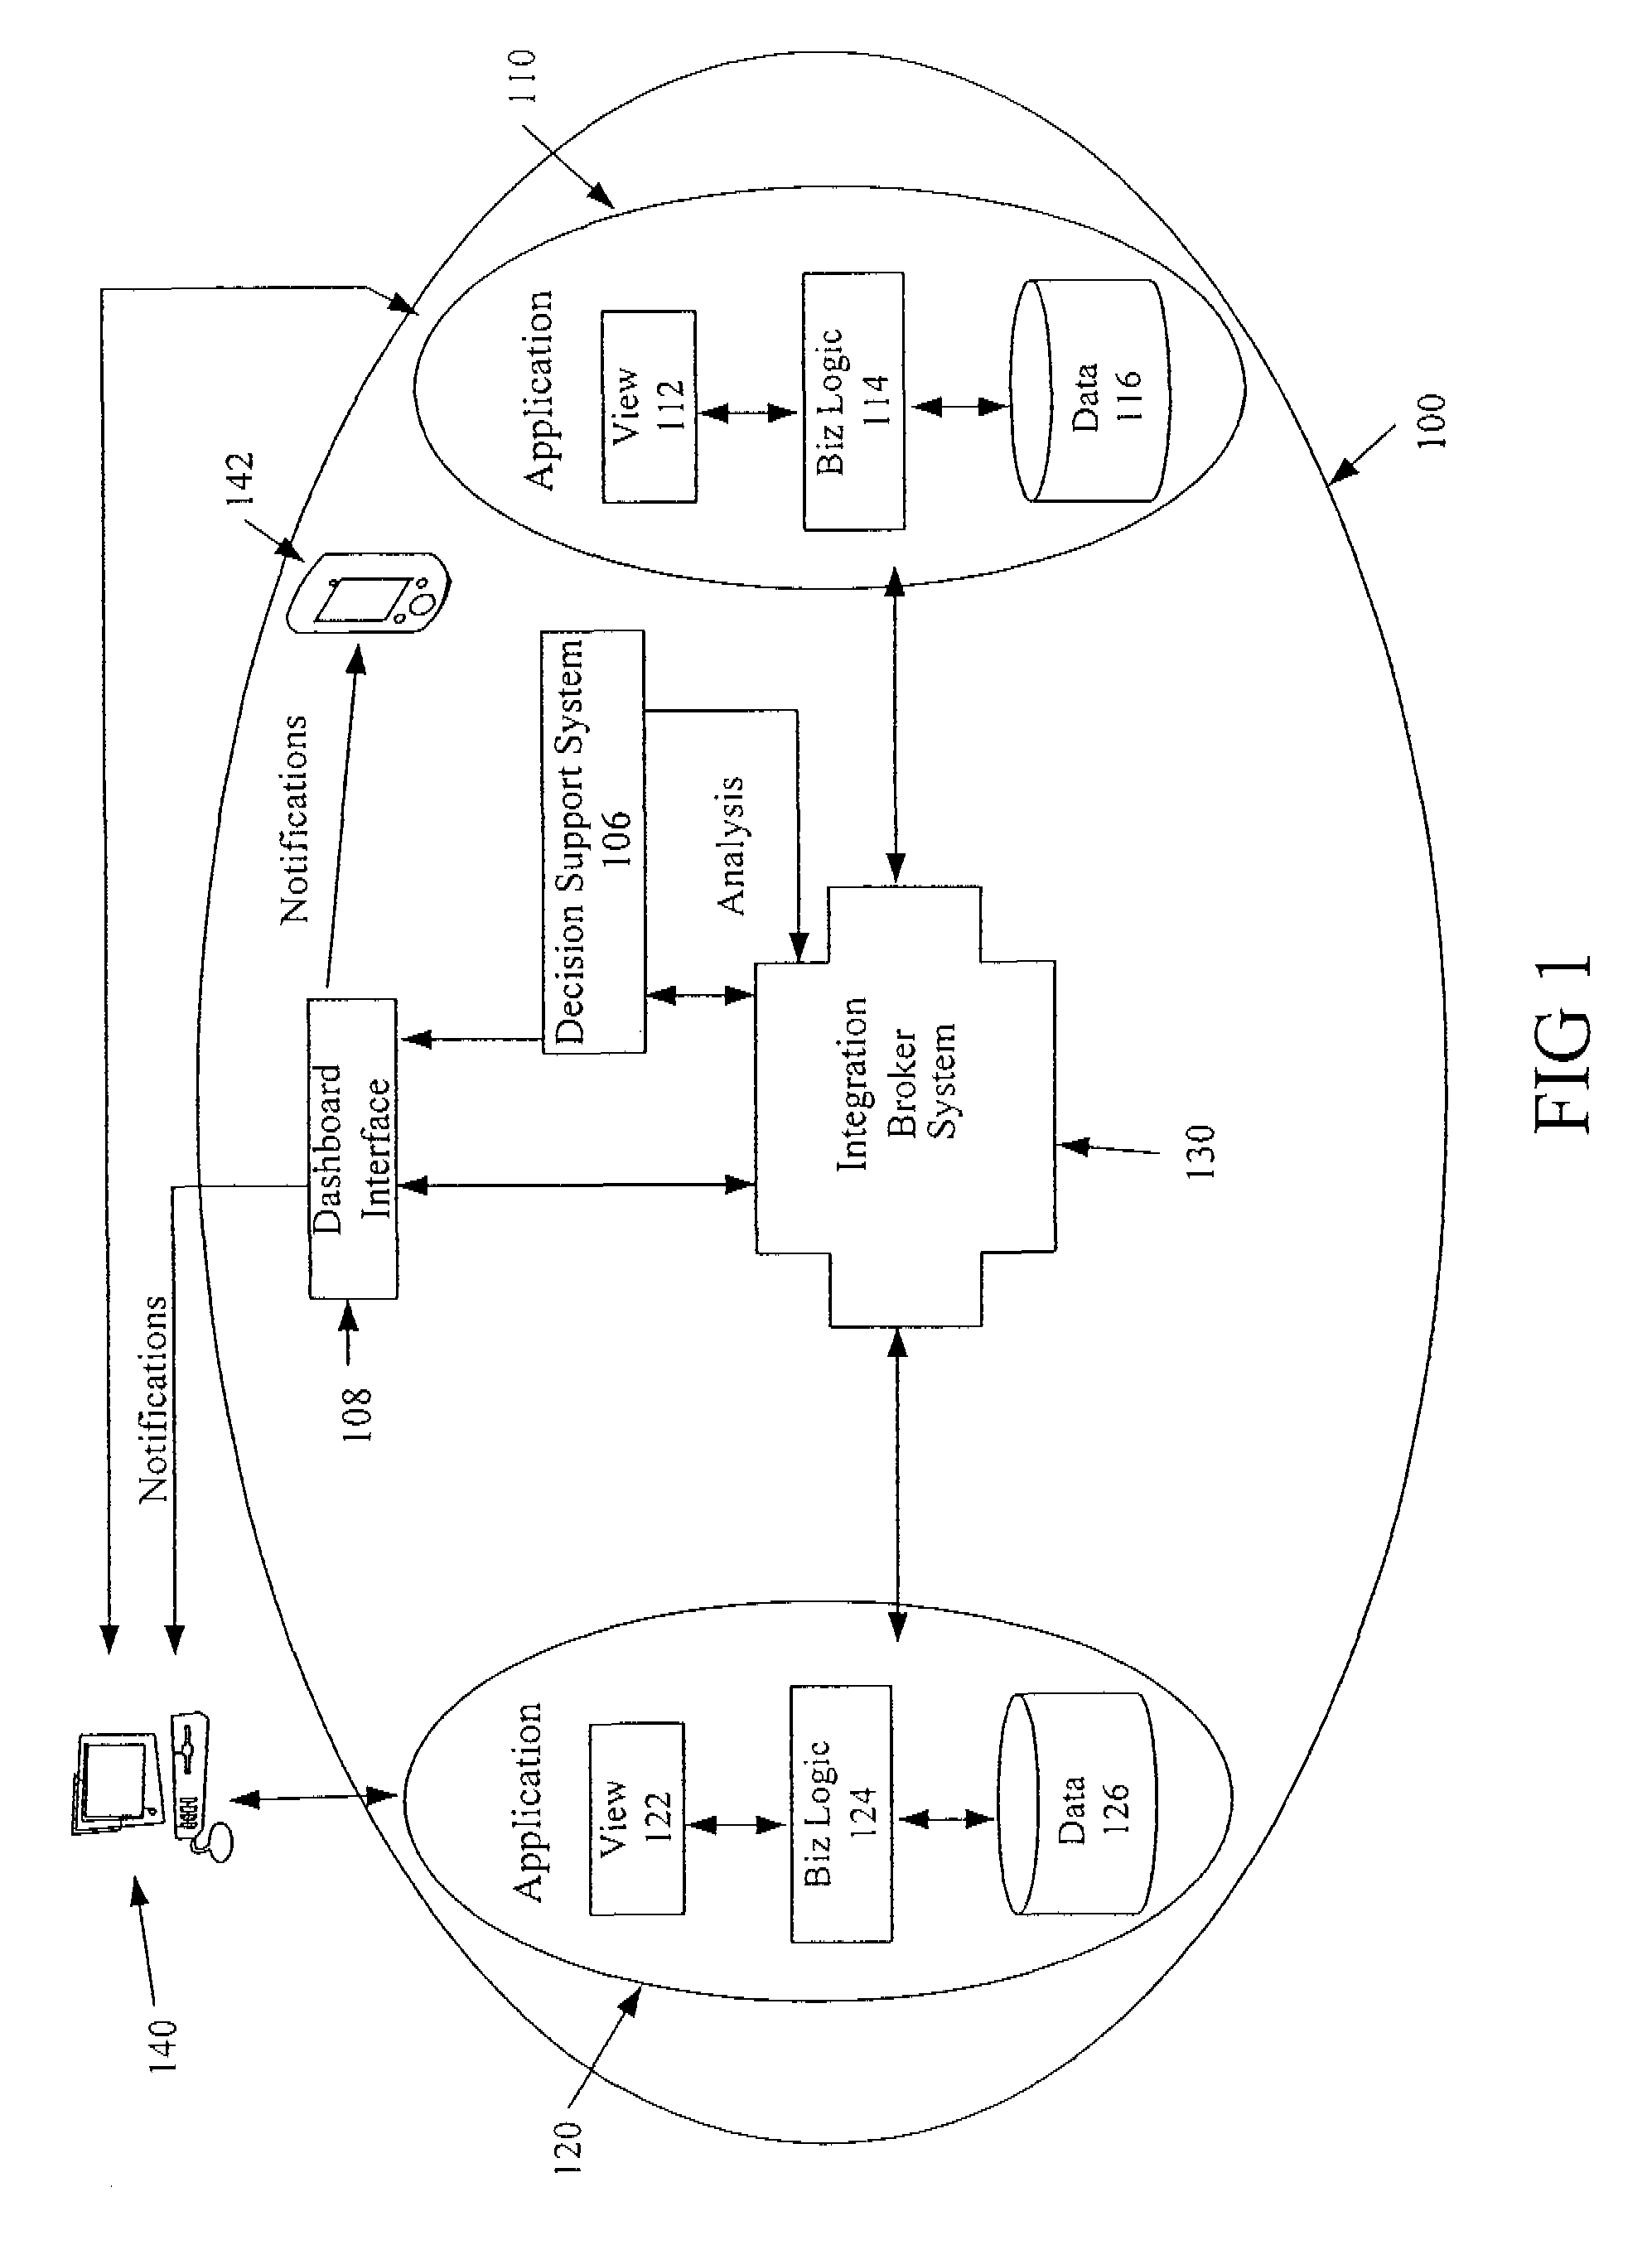 Methods and systems for providing a resource management view for airline operations